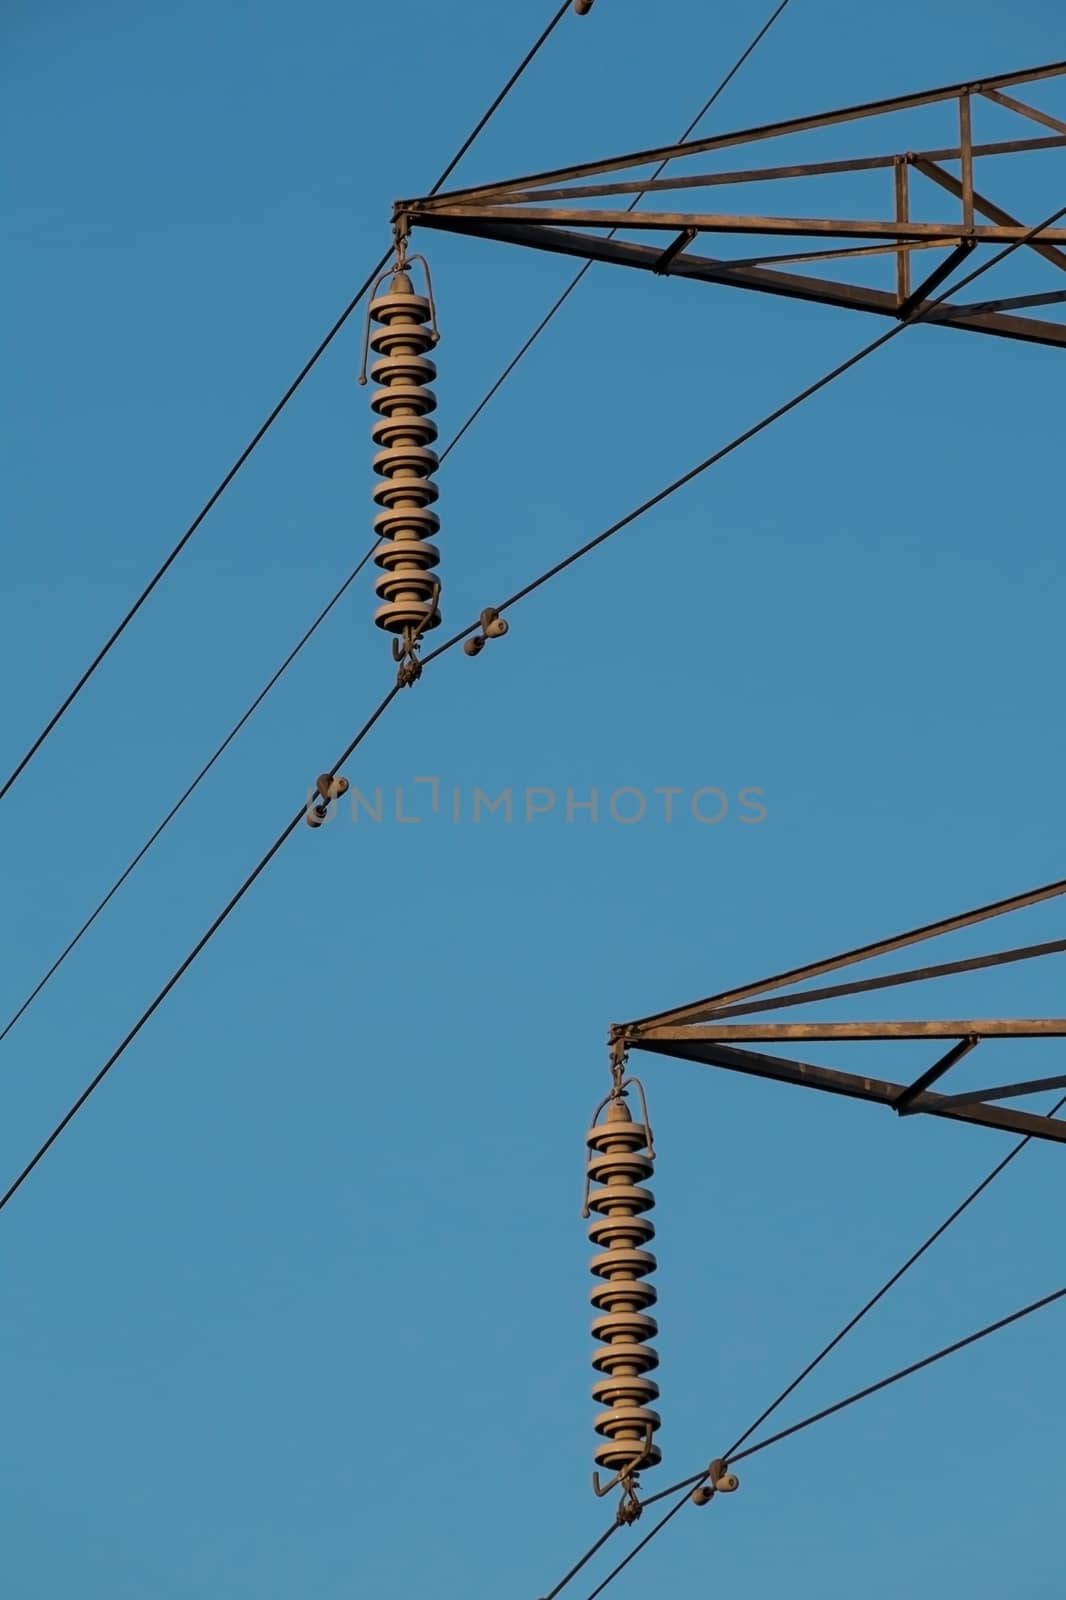 electricity pylon insulators and arms against a blue sky